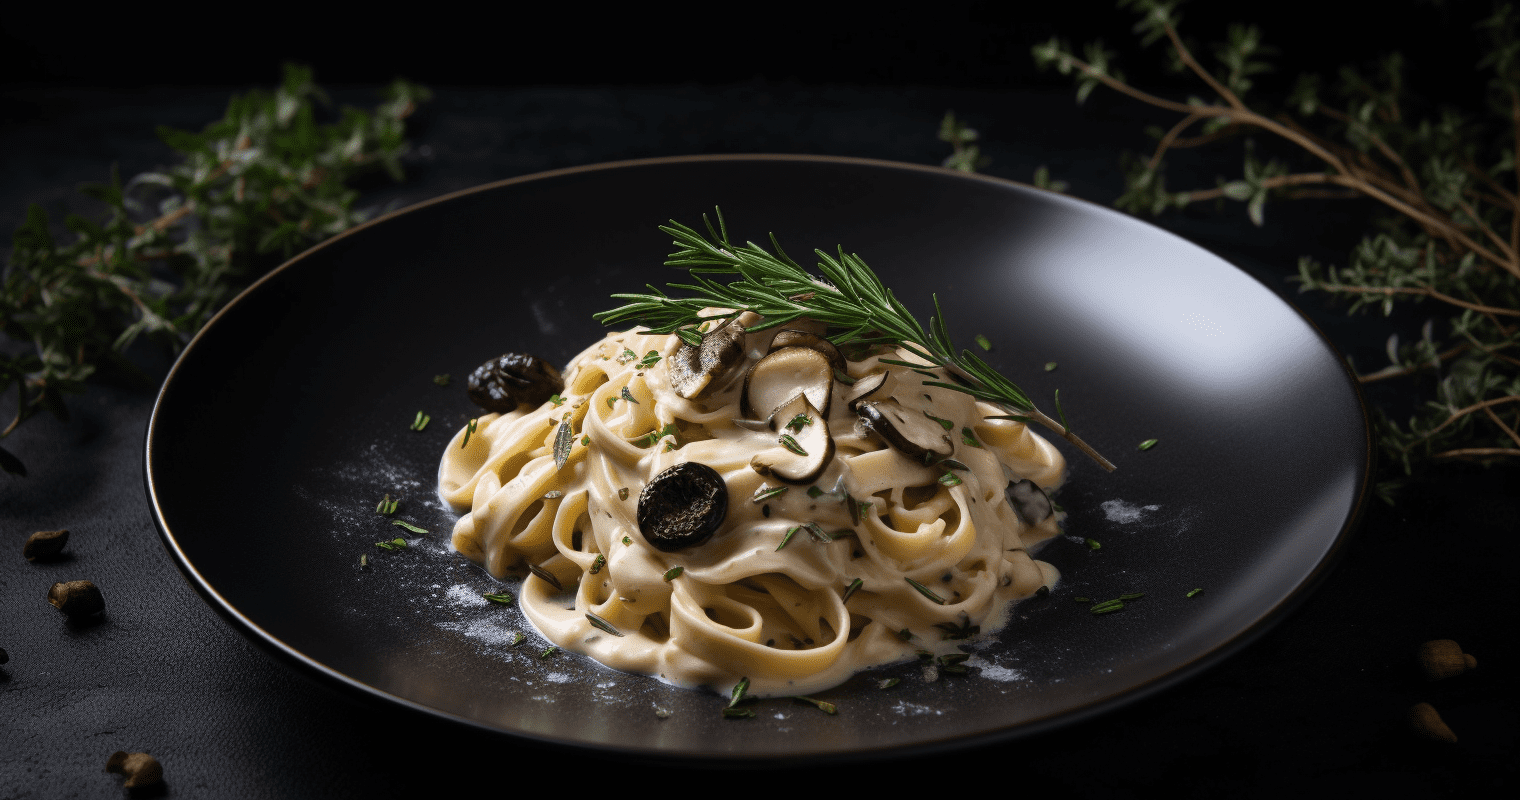 Delicious and Comforting Creamy Mushroom and Thyme Pasta Recipe